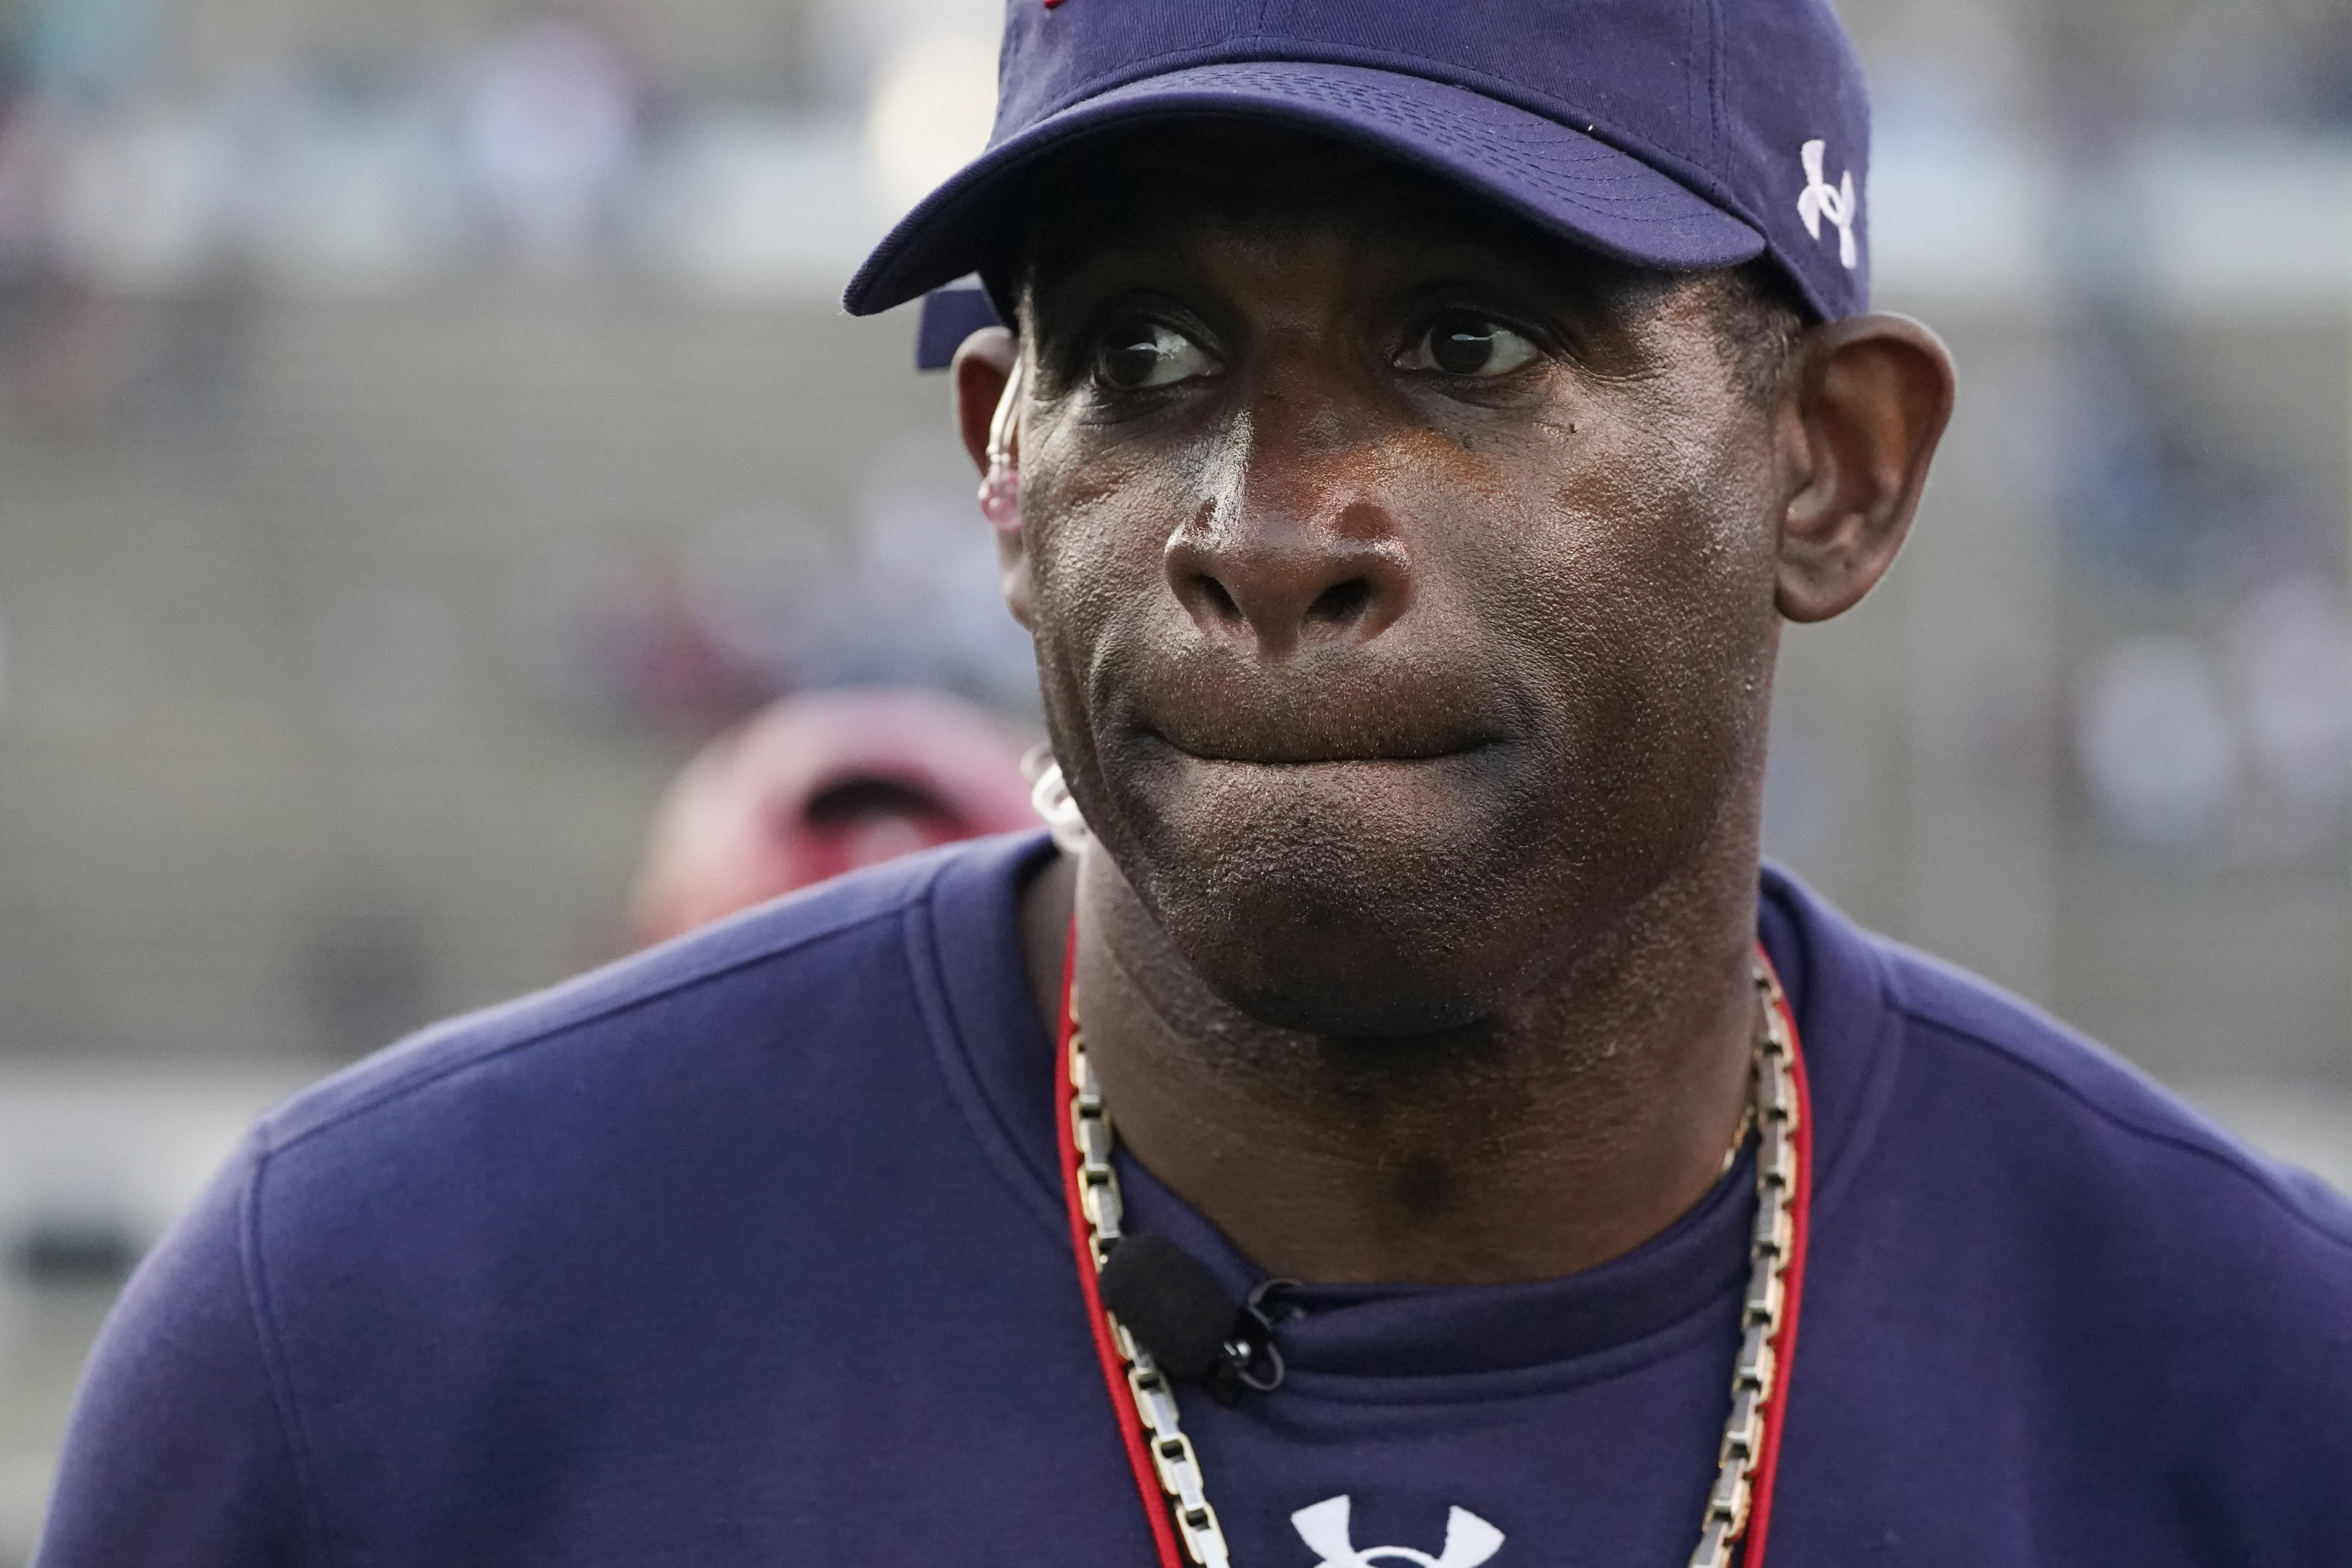 Reports: Deion Sanders to have emergency surgery on his groin